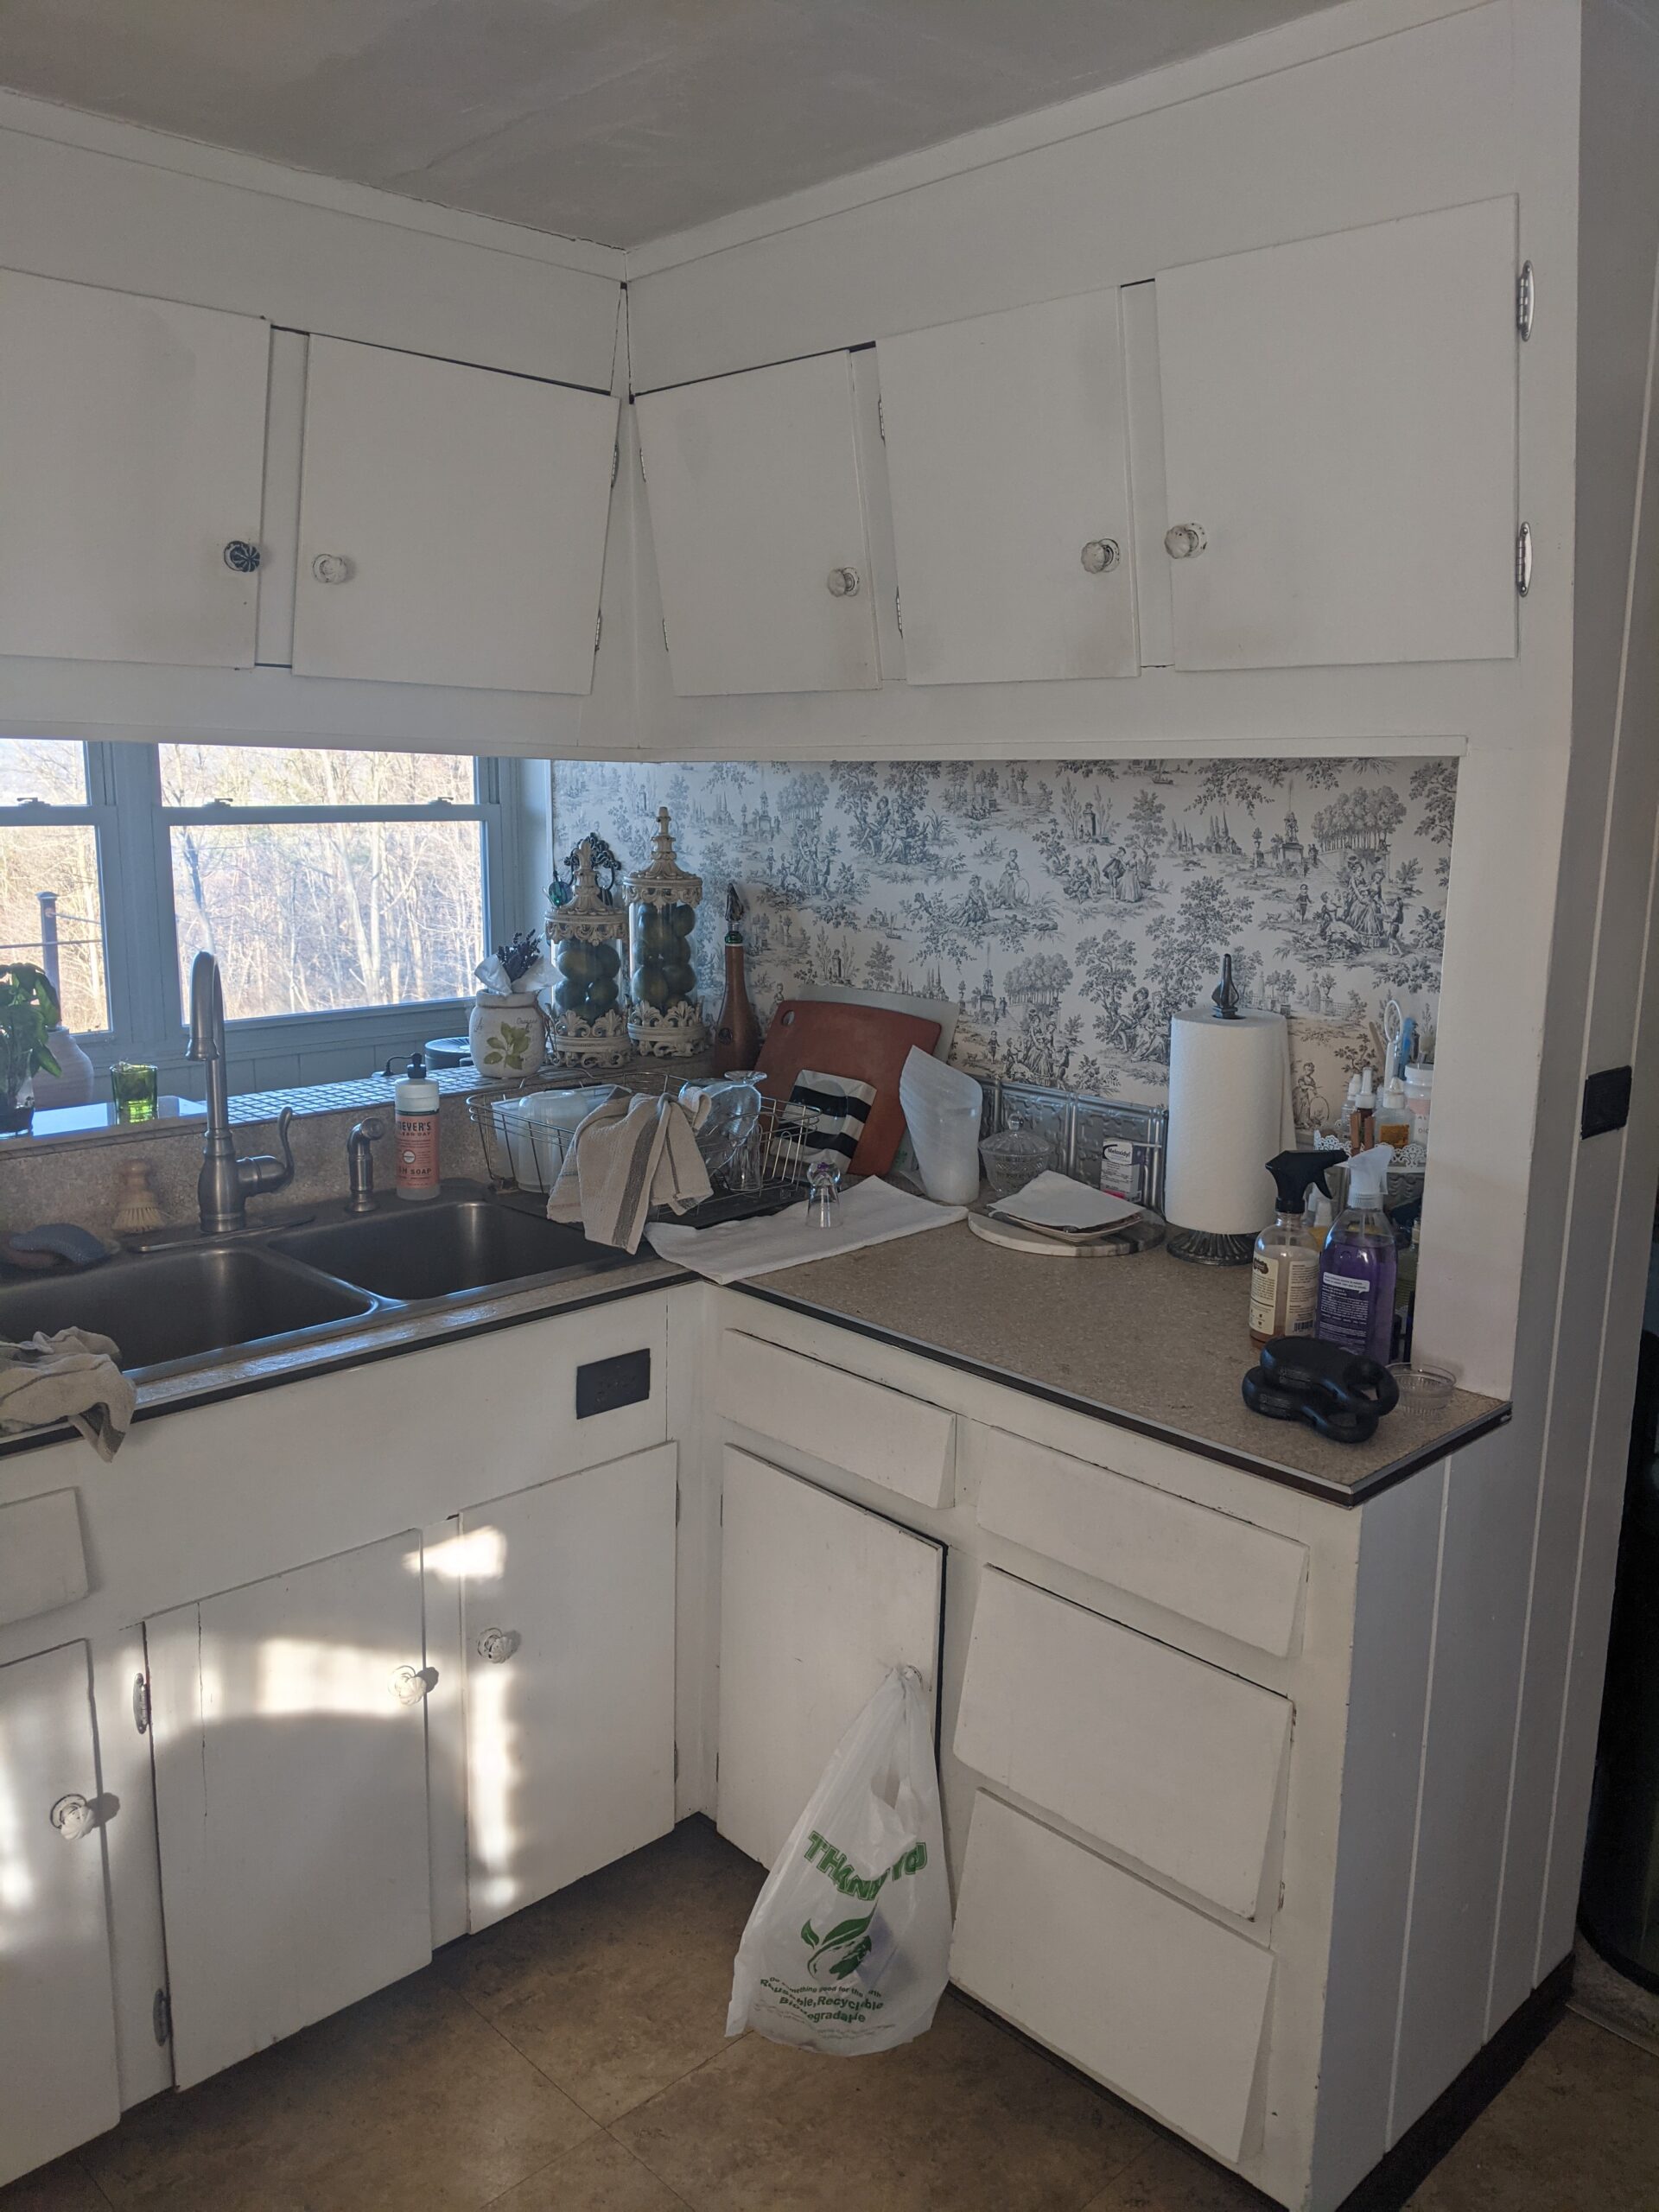 The kitchen area before the renovation.